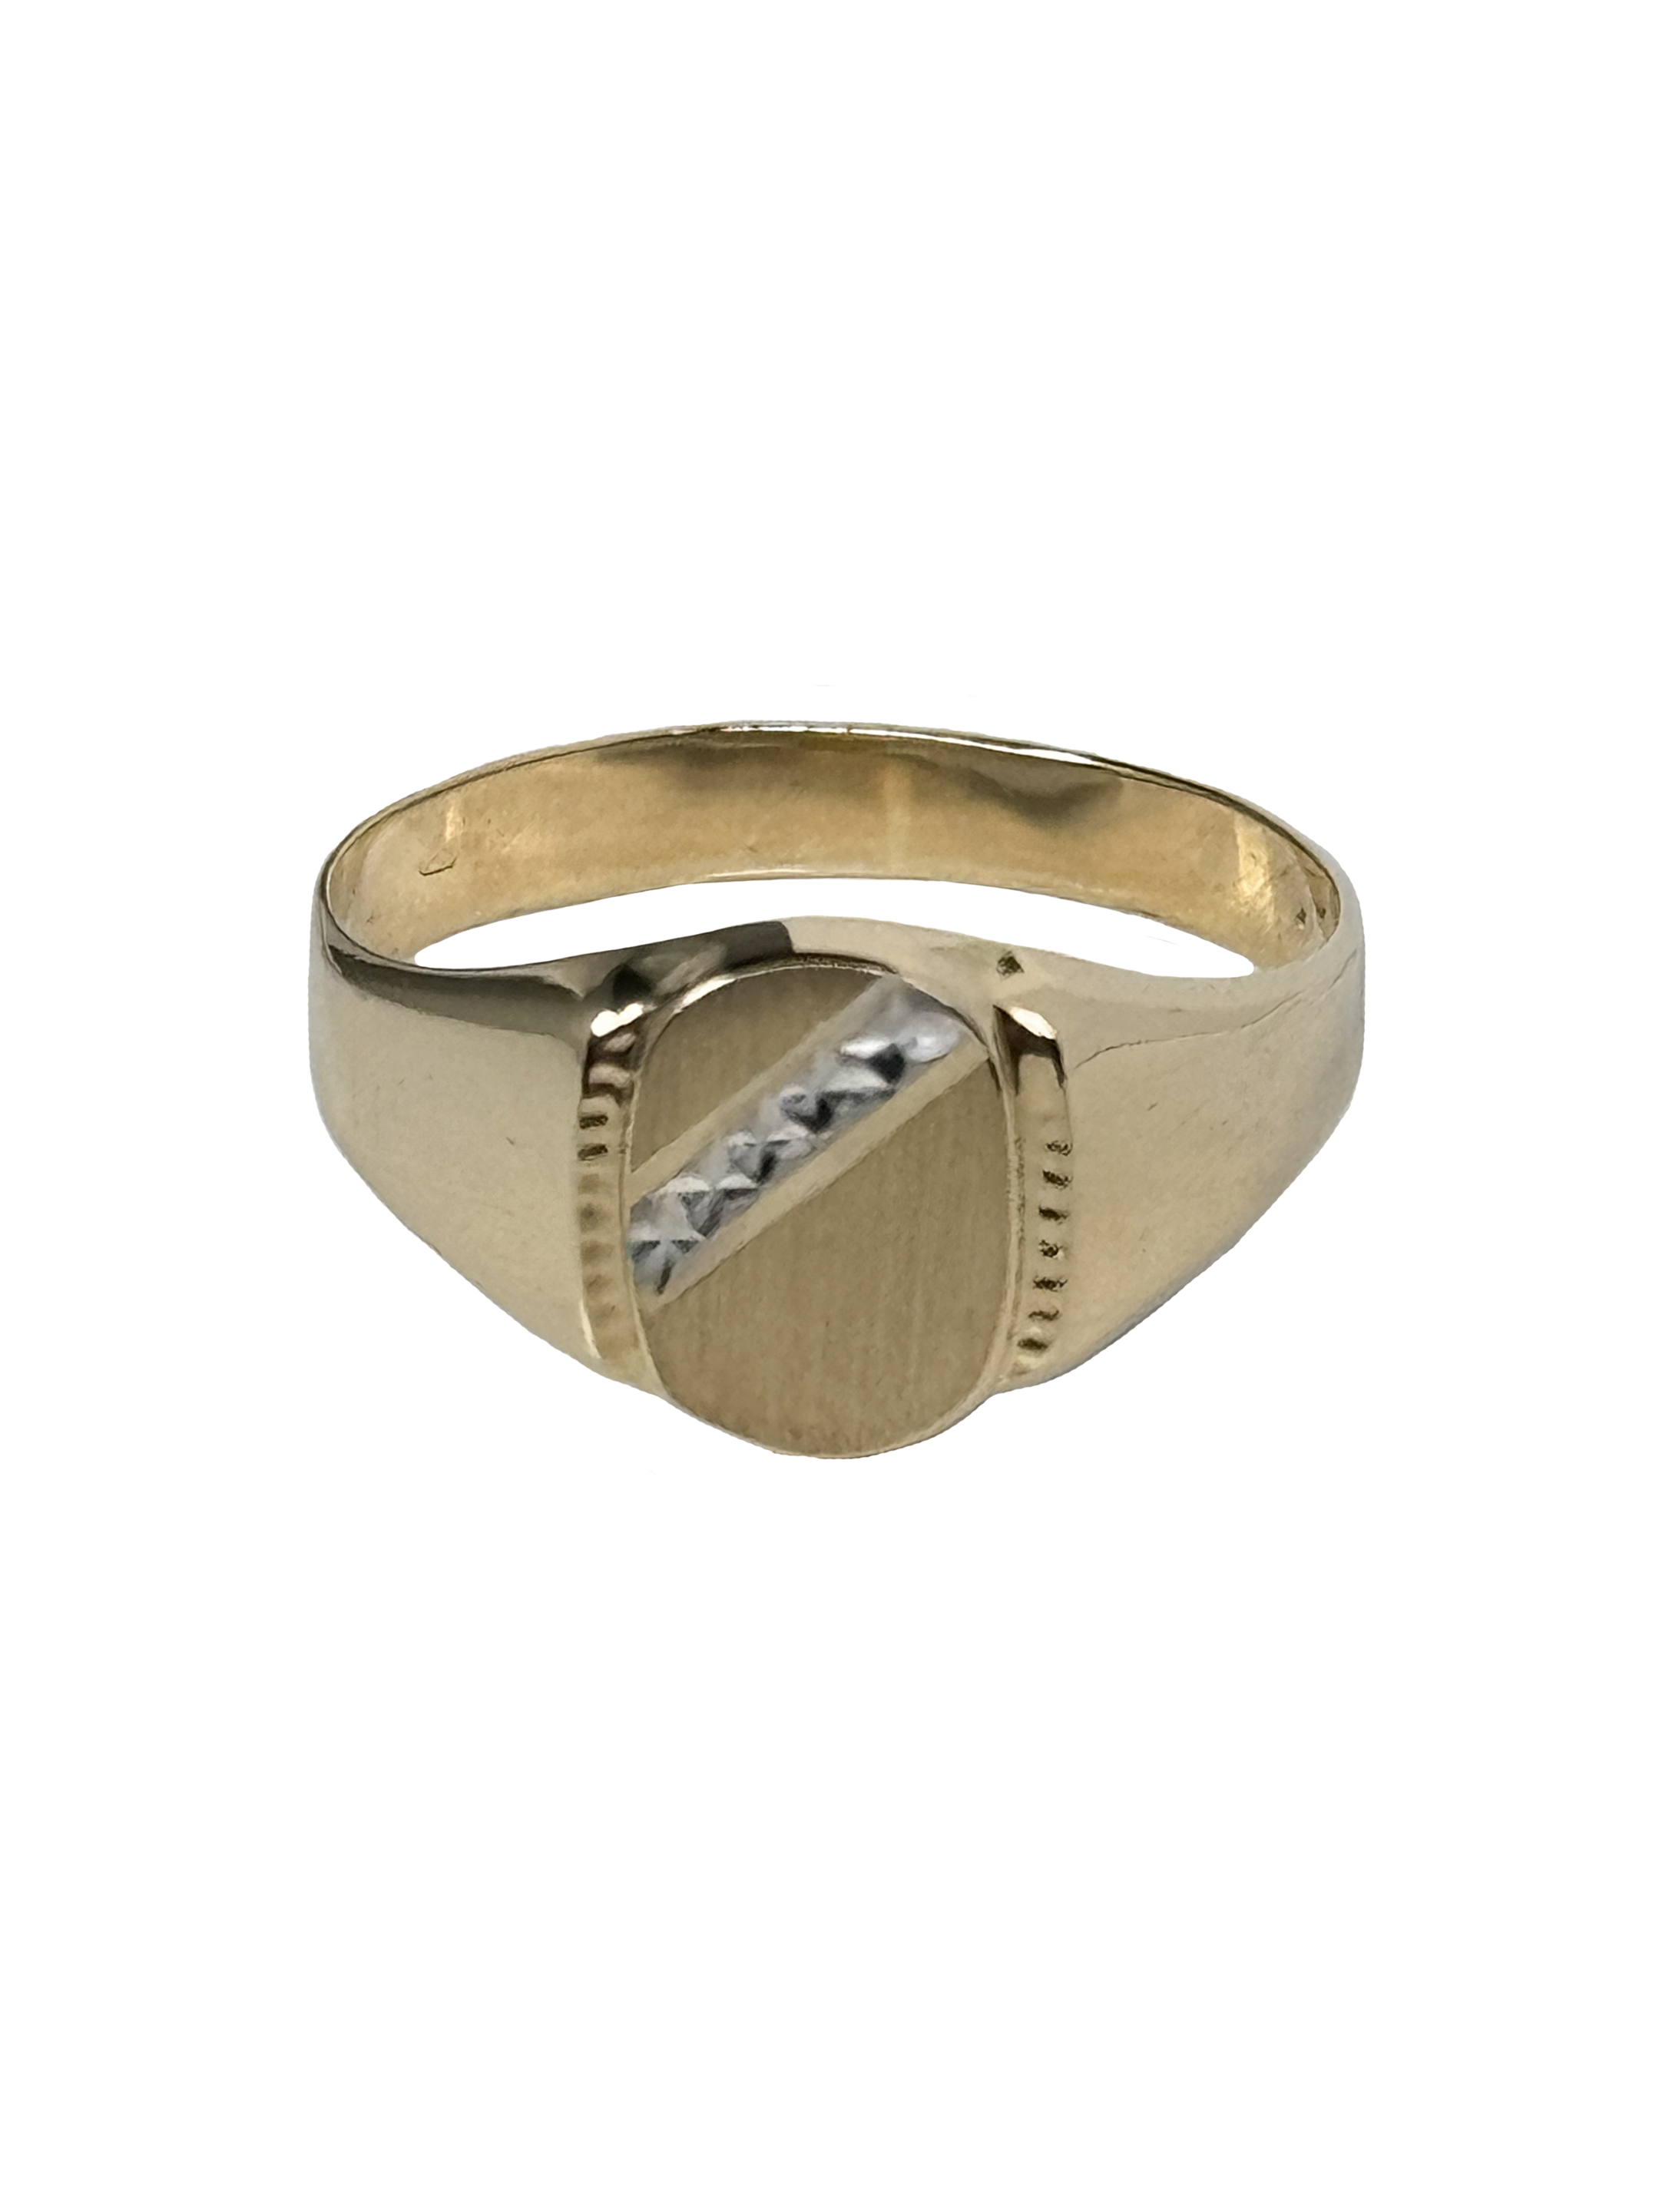 Gold signet ring made of combined gold